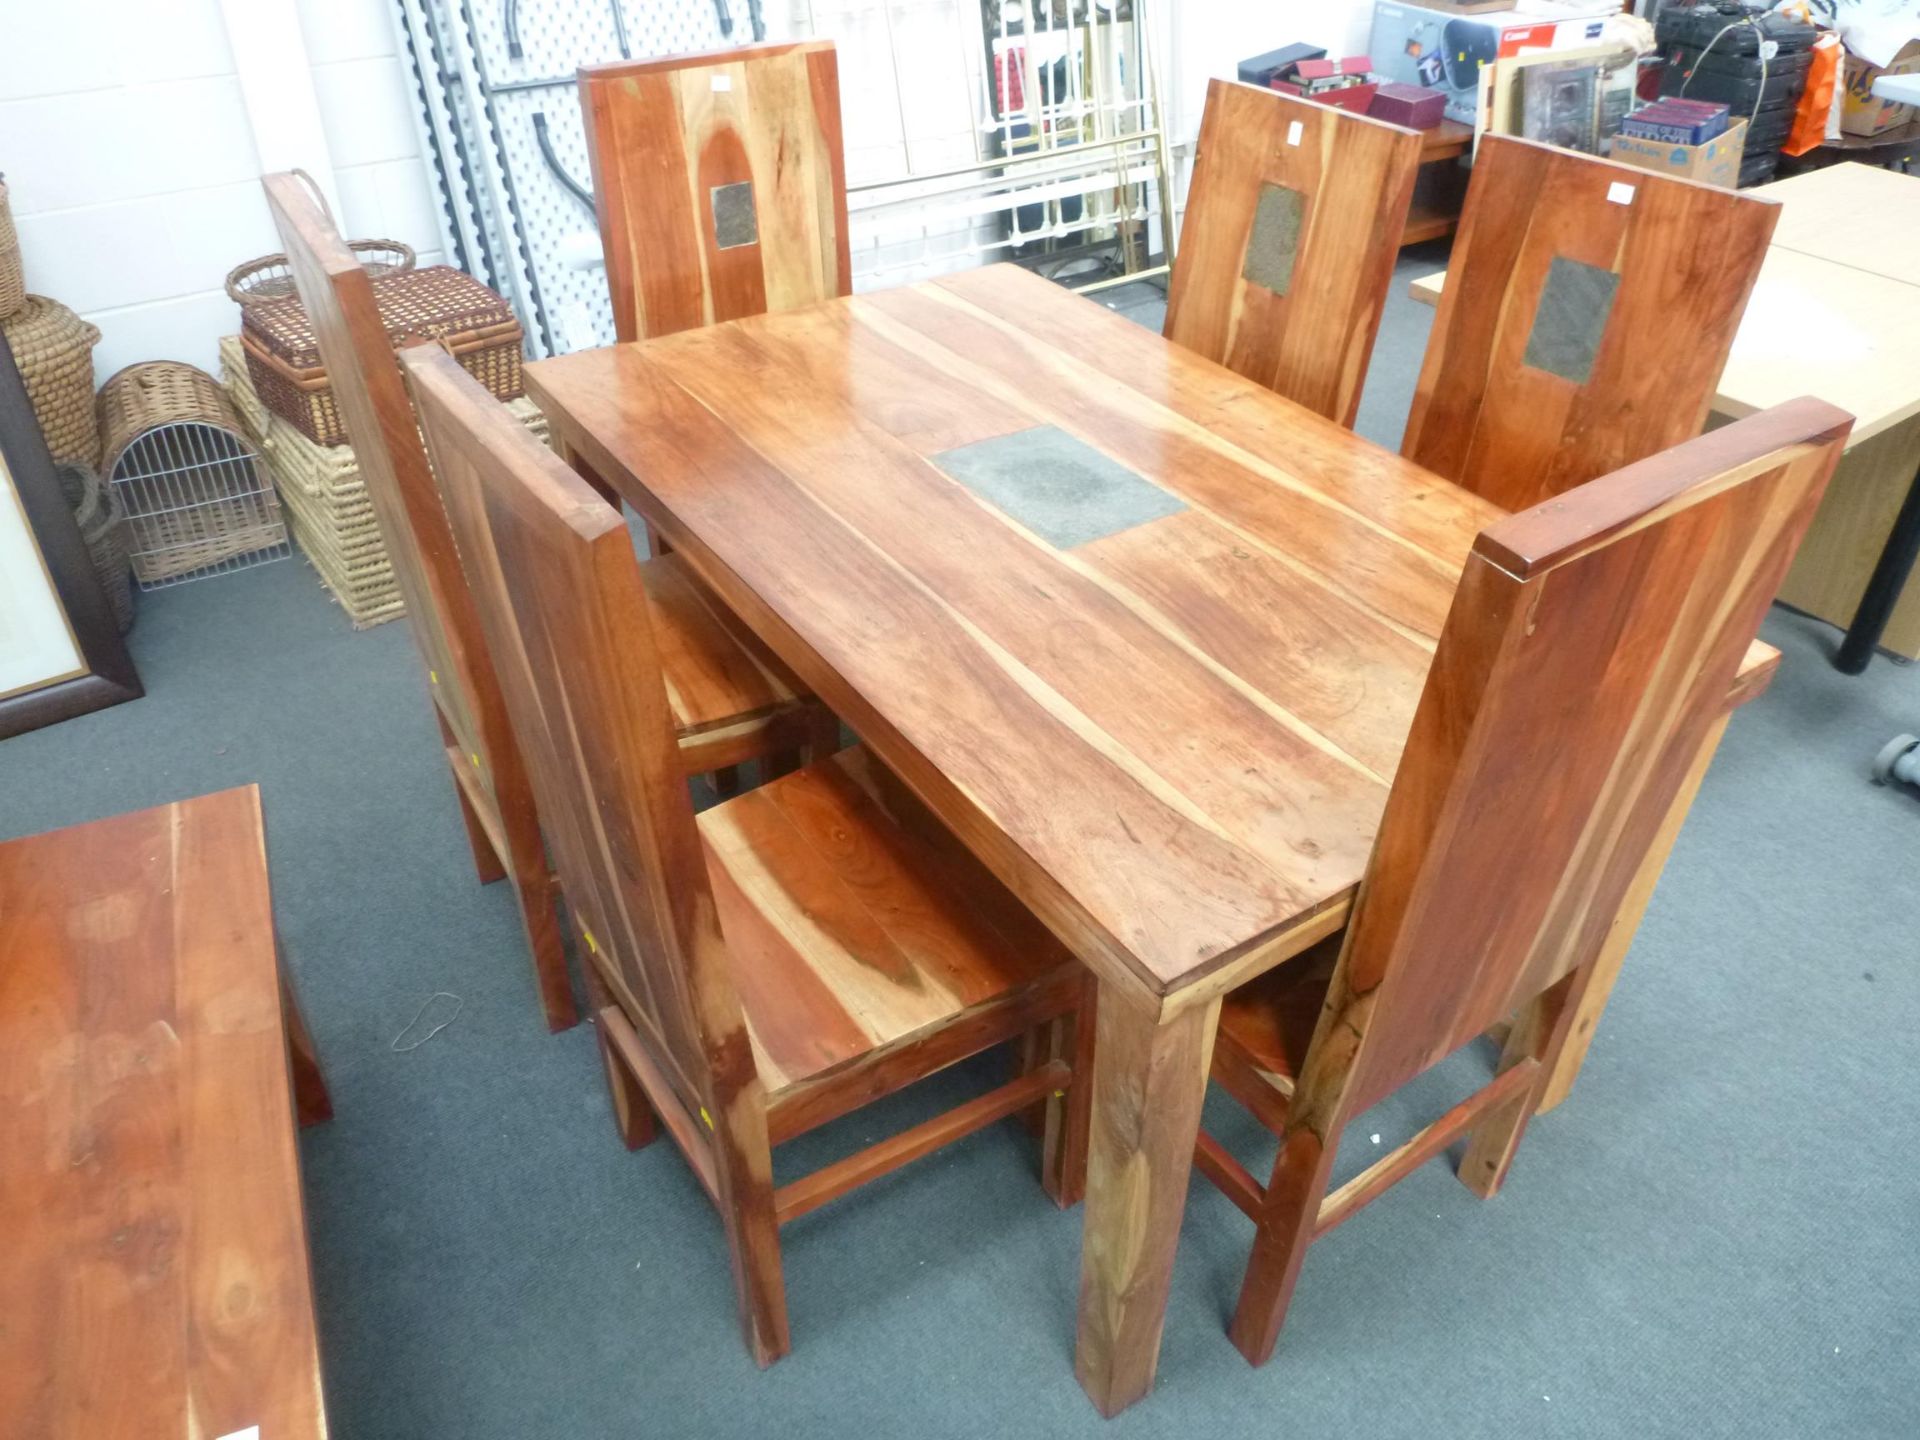 A Large Solid Wooden Dining Table with 6 Chairs. The table and back of each chair have a rectangular